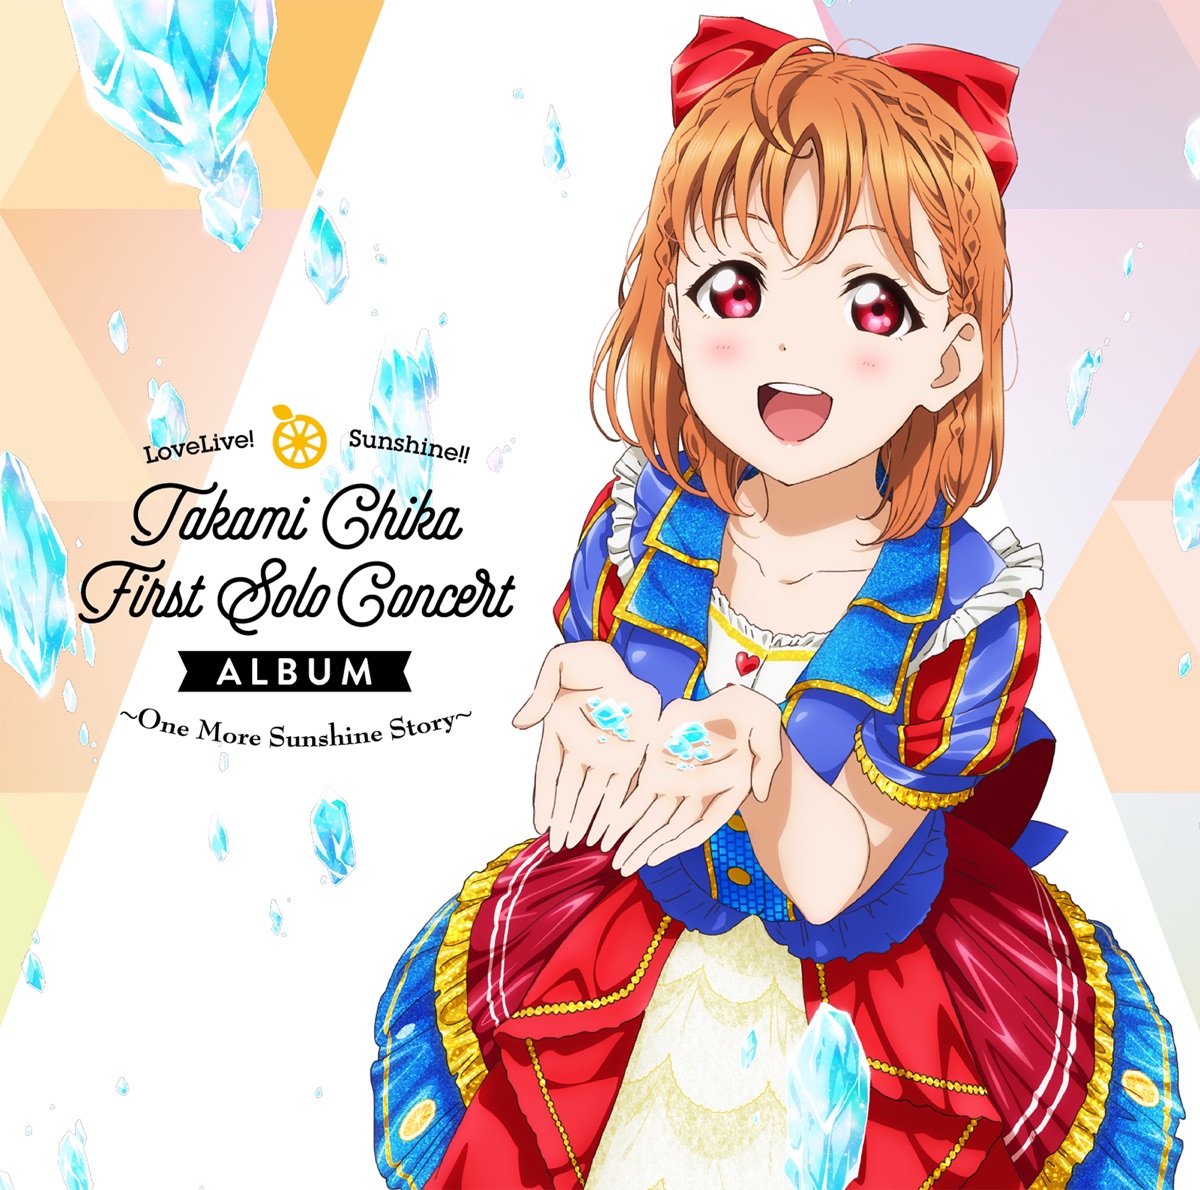 Cover art for『Chika Takami (Anju Inami) from Aqours - Never giving up!』from the release『LoveLive! Sunshine!! Takami Chika First Solo Concert Album 〜One More Sunshine Story〜